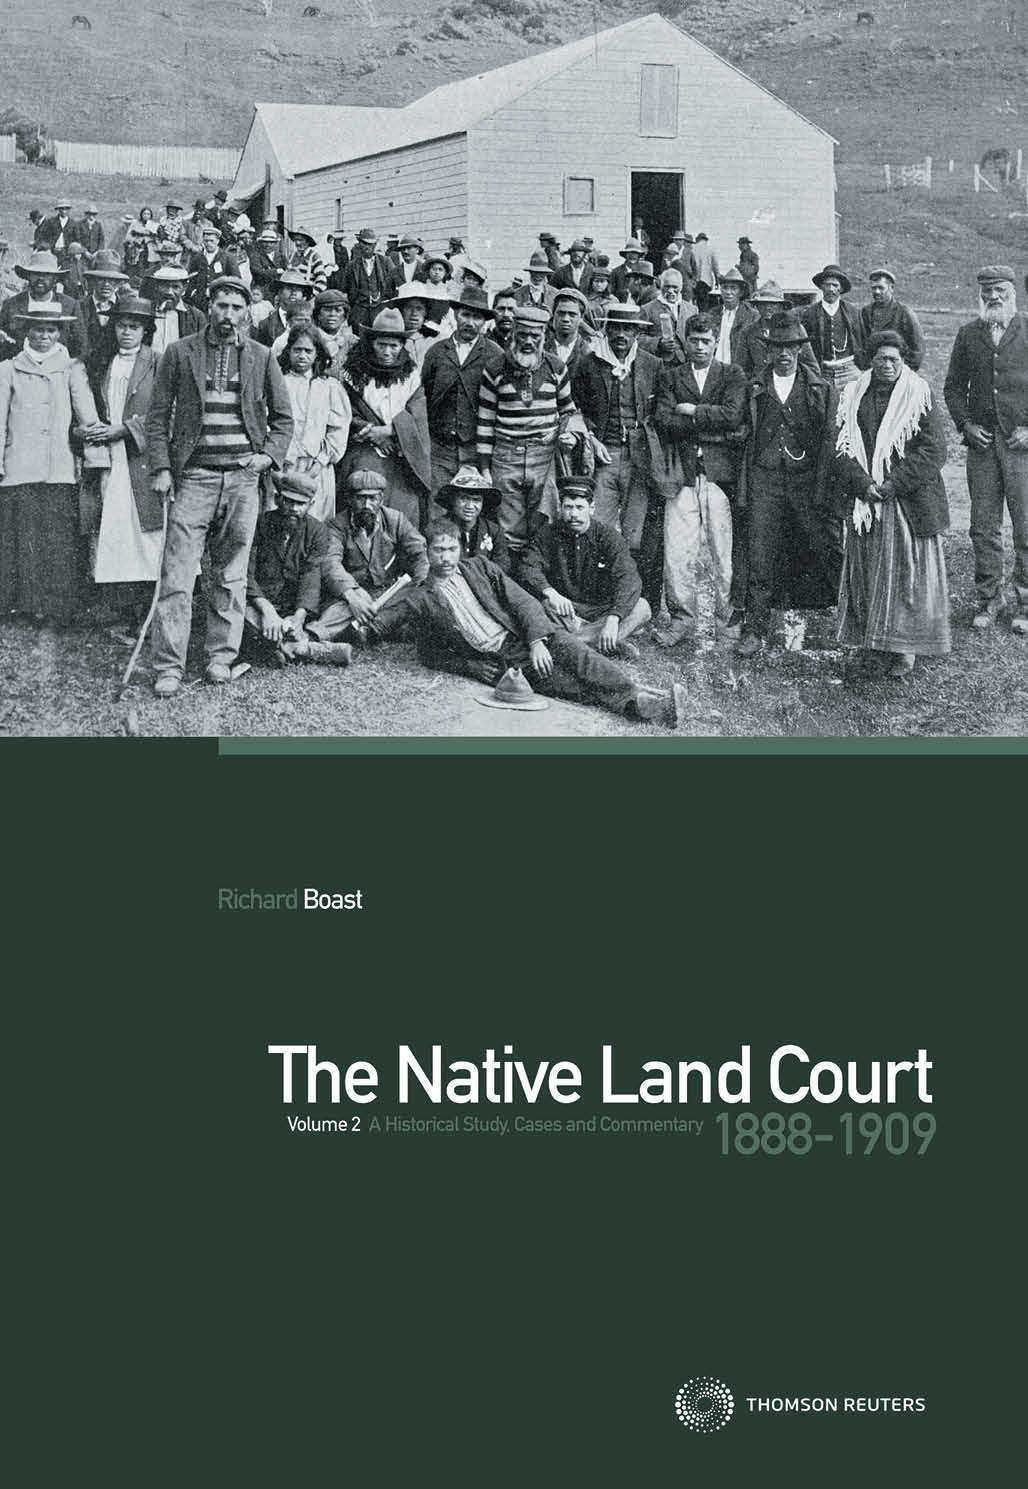 The Native Land Court Volume 2 1888-1909: A Historical Study, Cases and Commentary (Book)